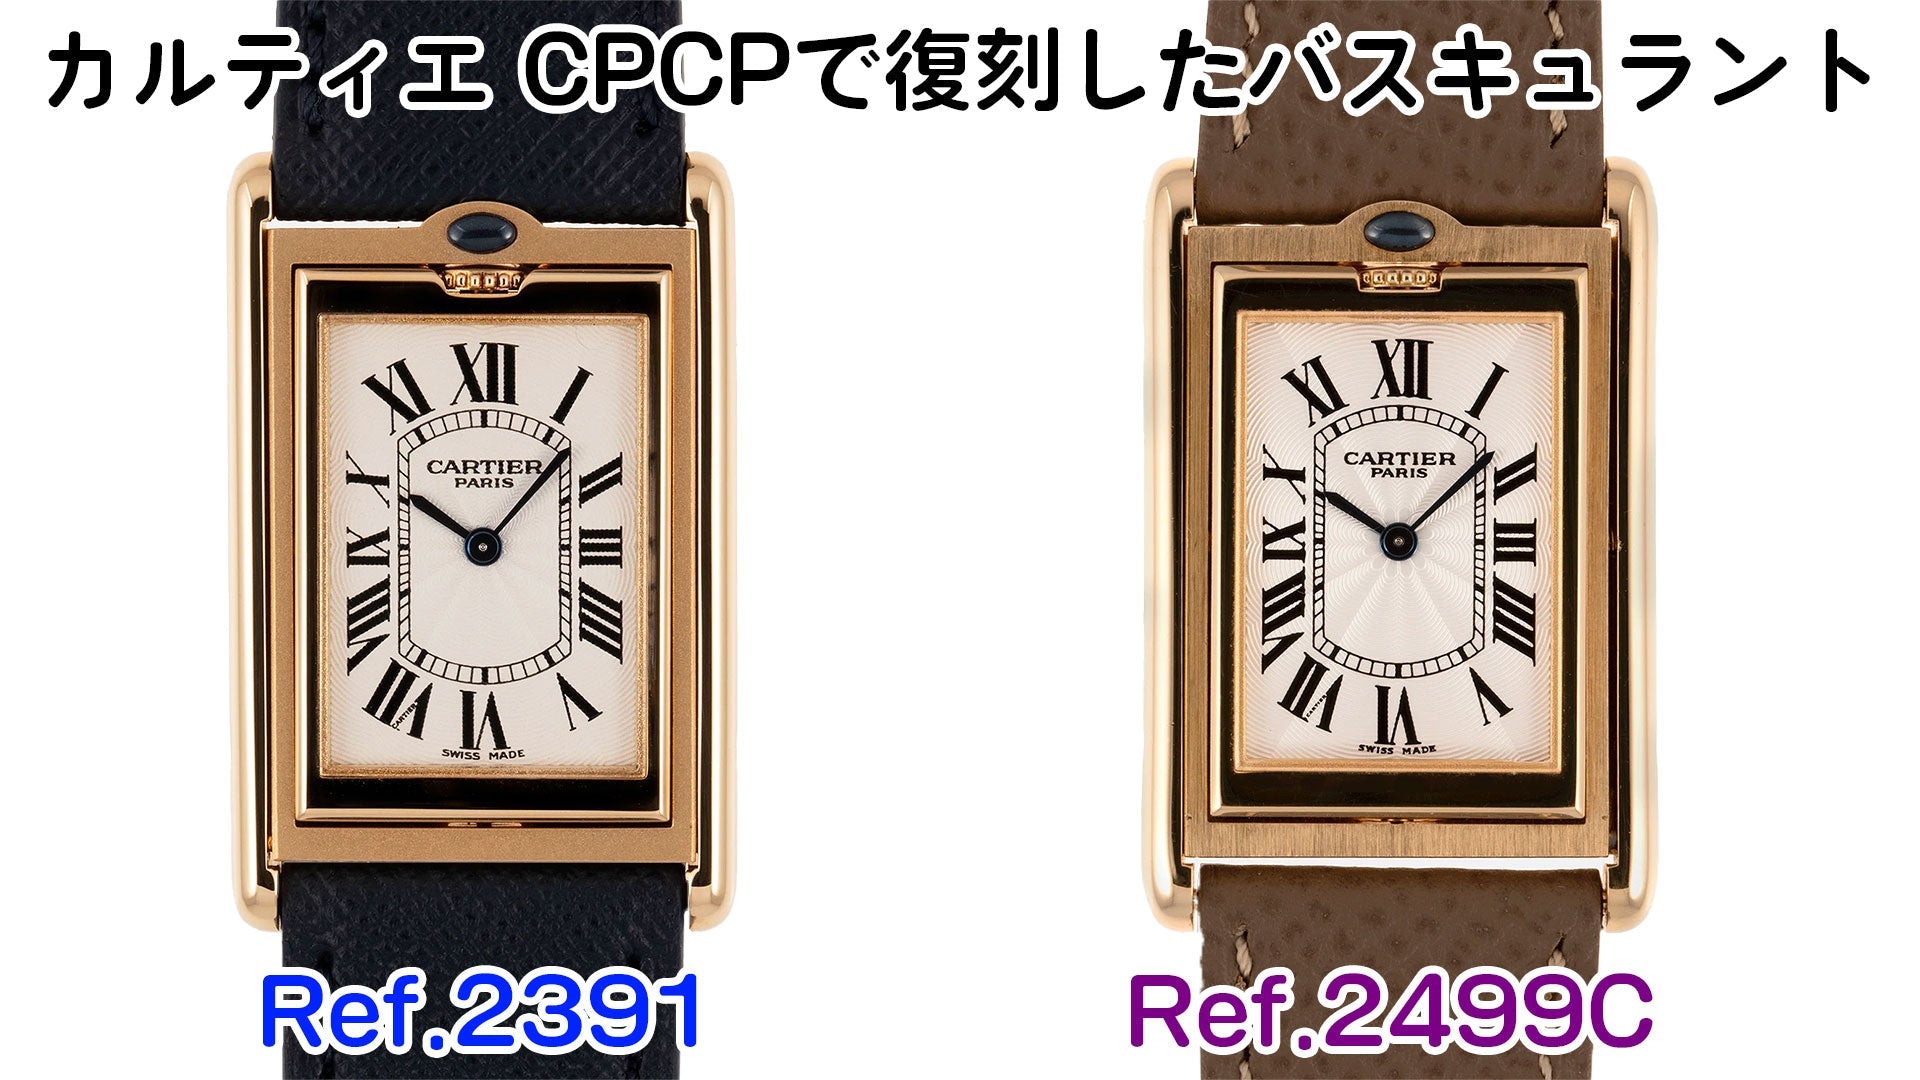 Cartier watches: Two types of Basculant watches reproduced by CPCP